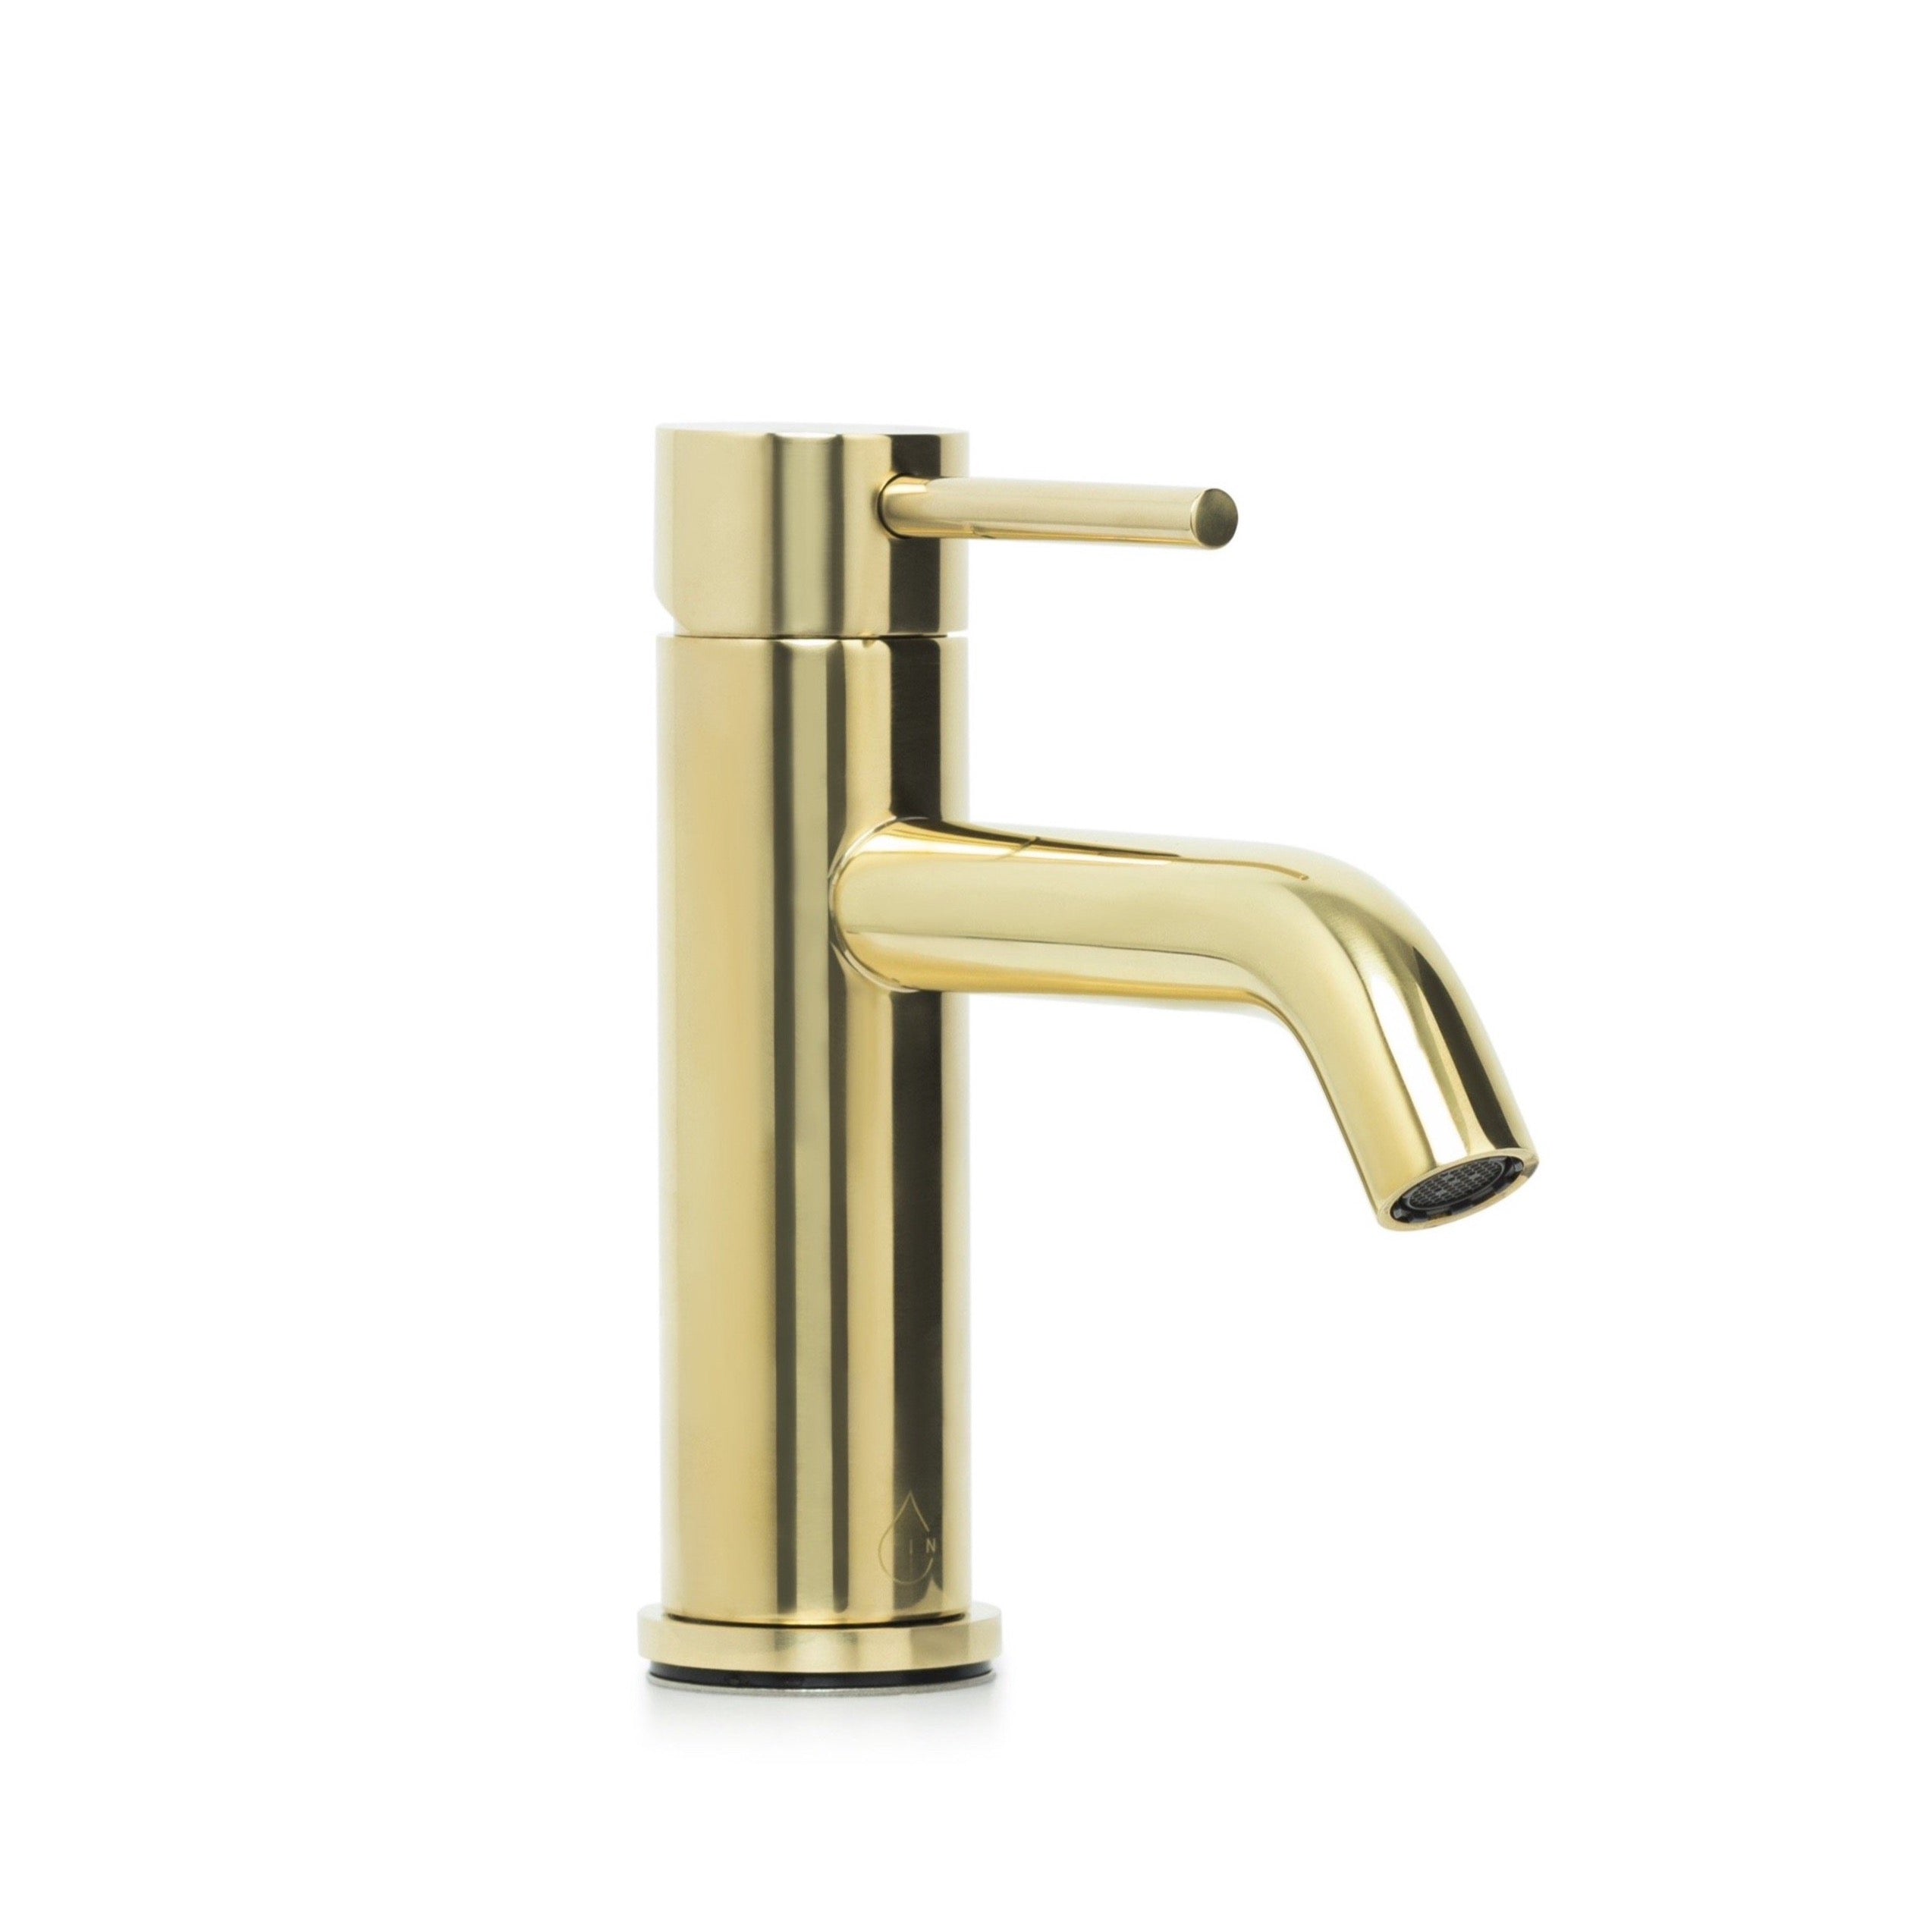 Bondi Pin Lever Basin Mixer with Curved Spout in Raw Brass